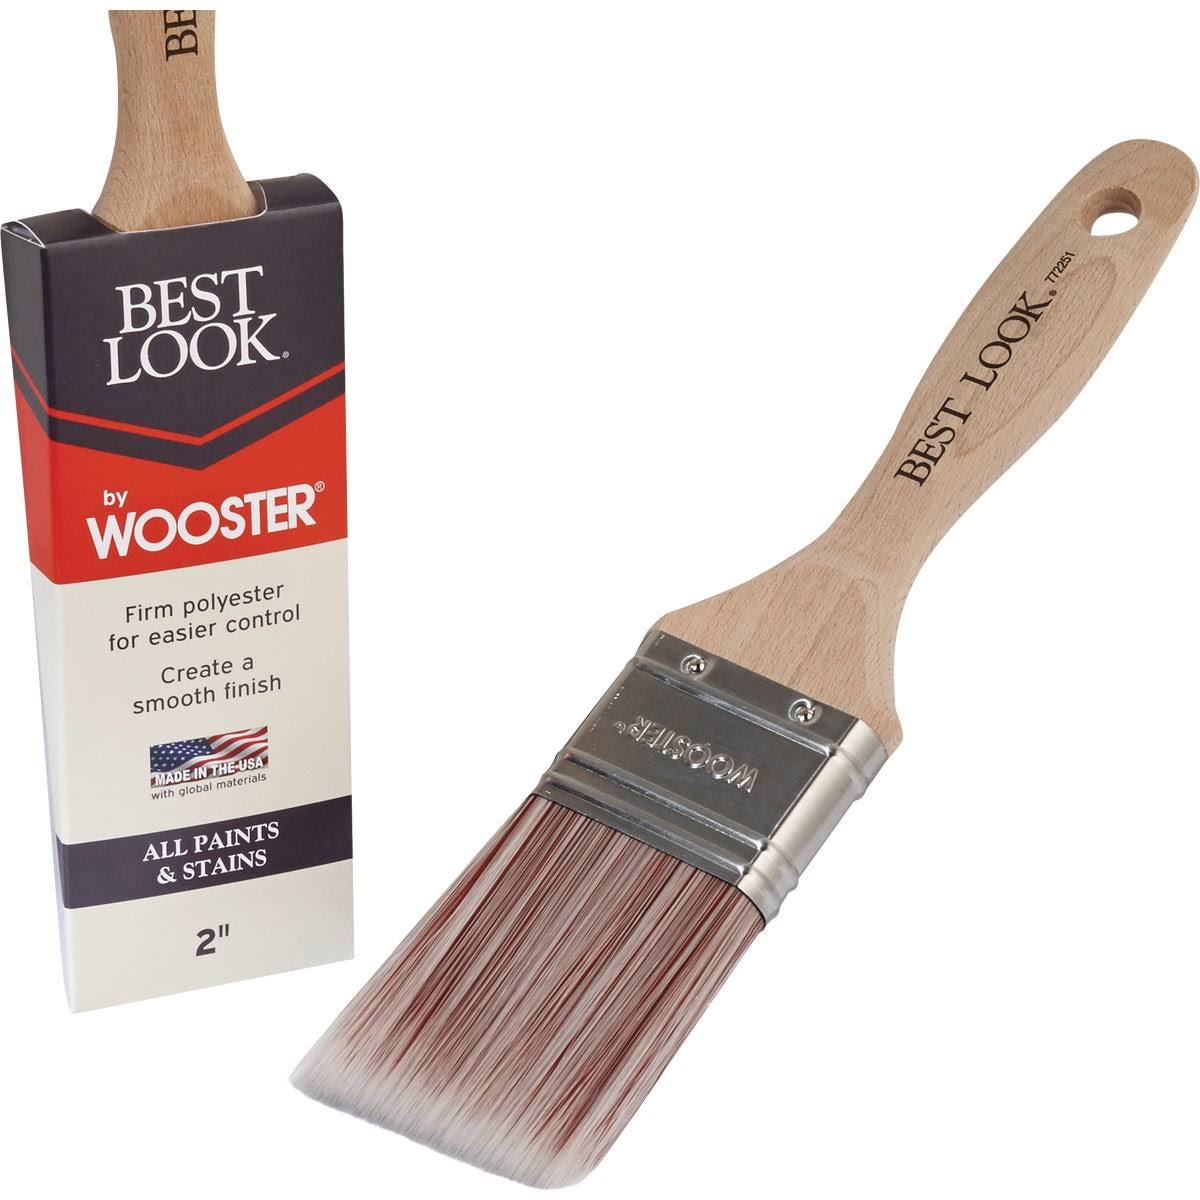 Best Look by Wooster 2 in. Flat Paint Brush D4024-2